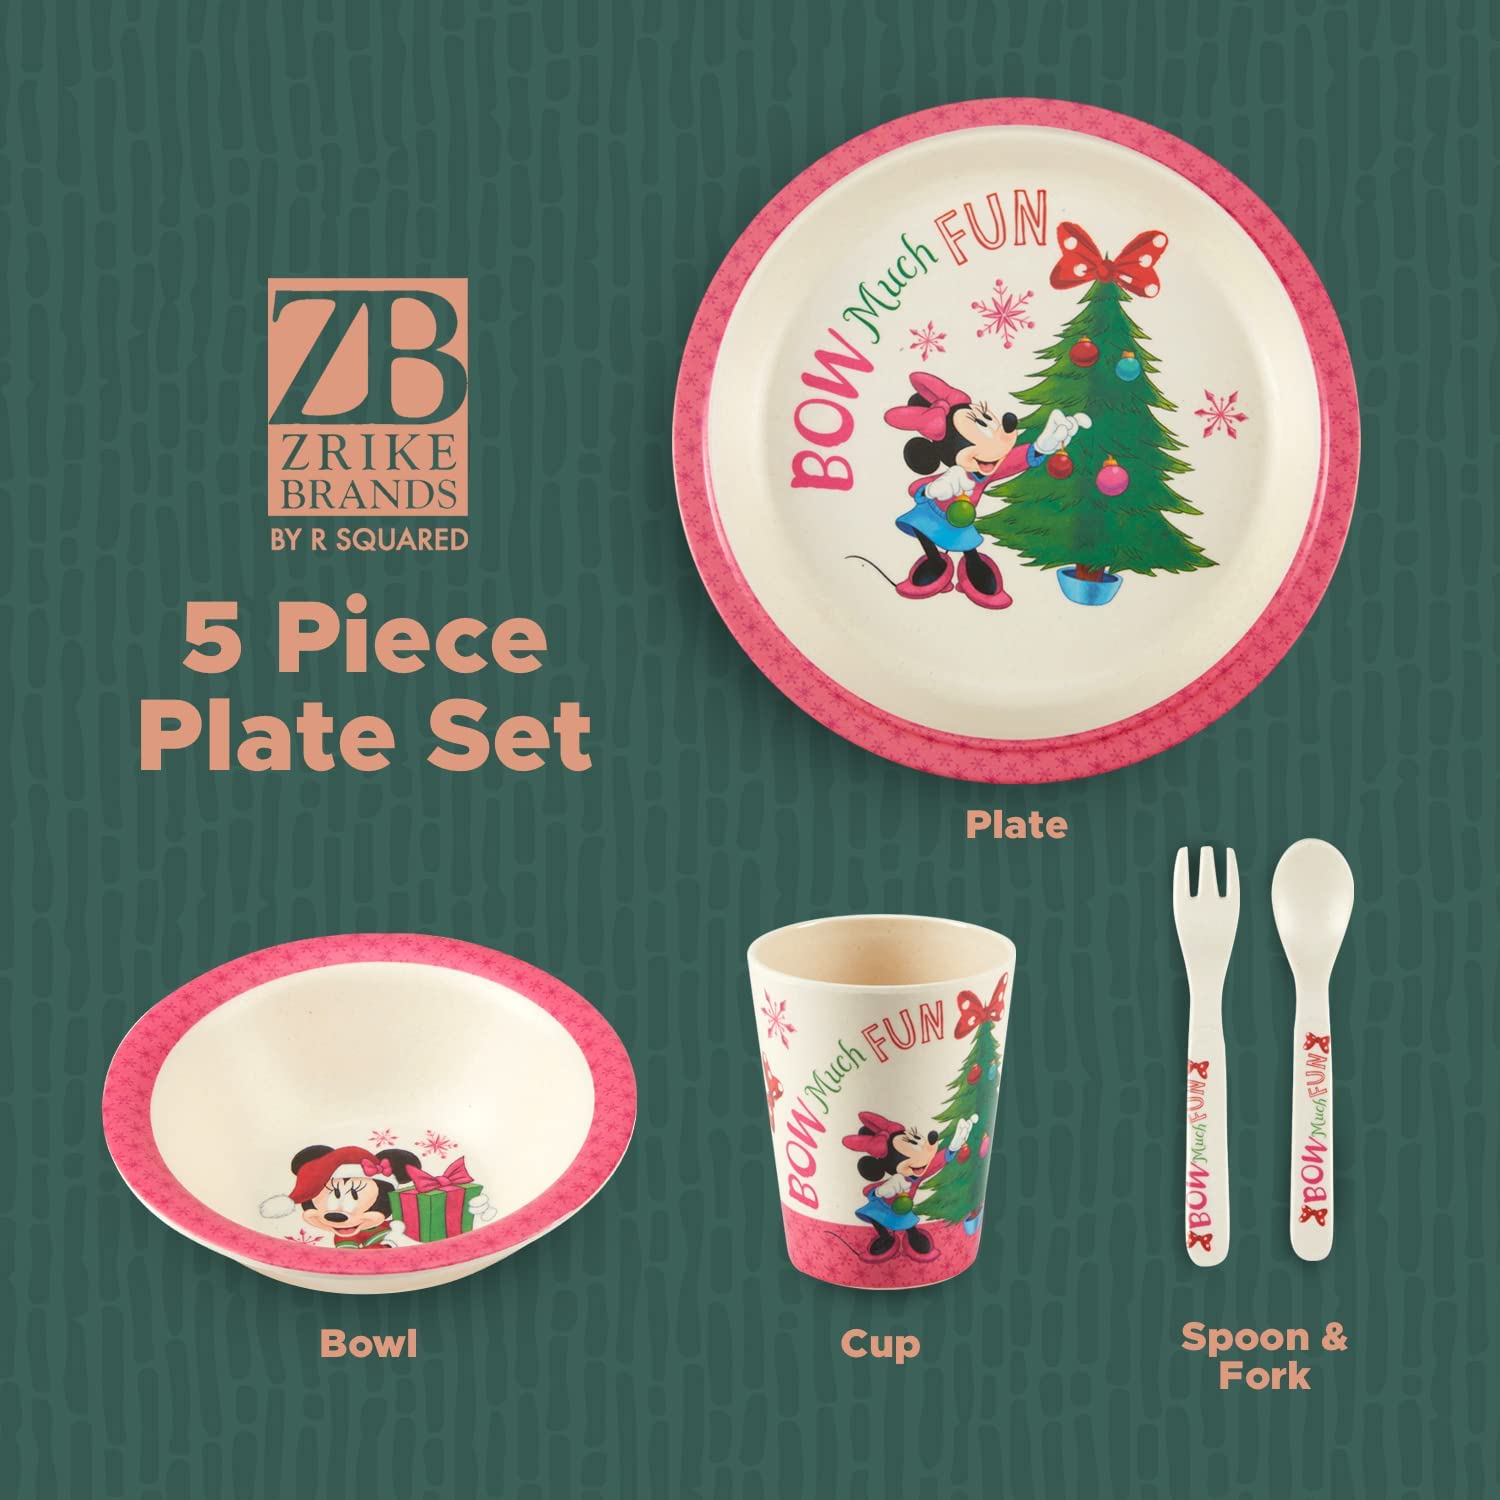 Bamboo Kids’ 5-Piece Dinnerware Set By Zrike Brands-Tableware Set With Dinner Plate, Bowl, Cup, Fork & Spoon- BPA-Free Disney Toddlers Feeding Set- Great Holiday Gift MINNIE JOY 5PC BAMBOO SET